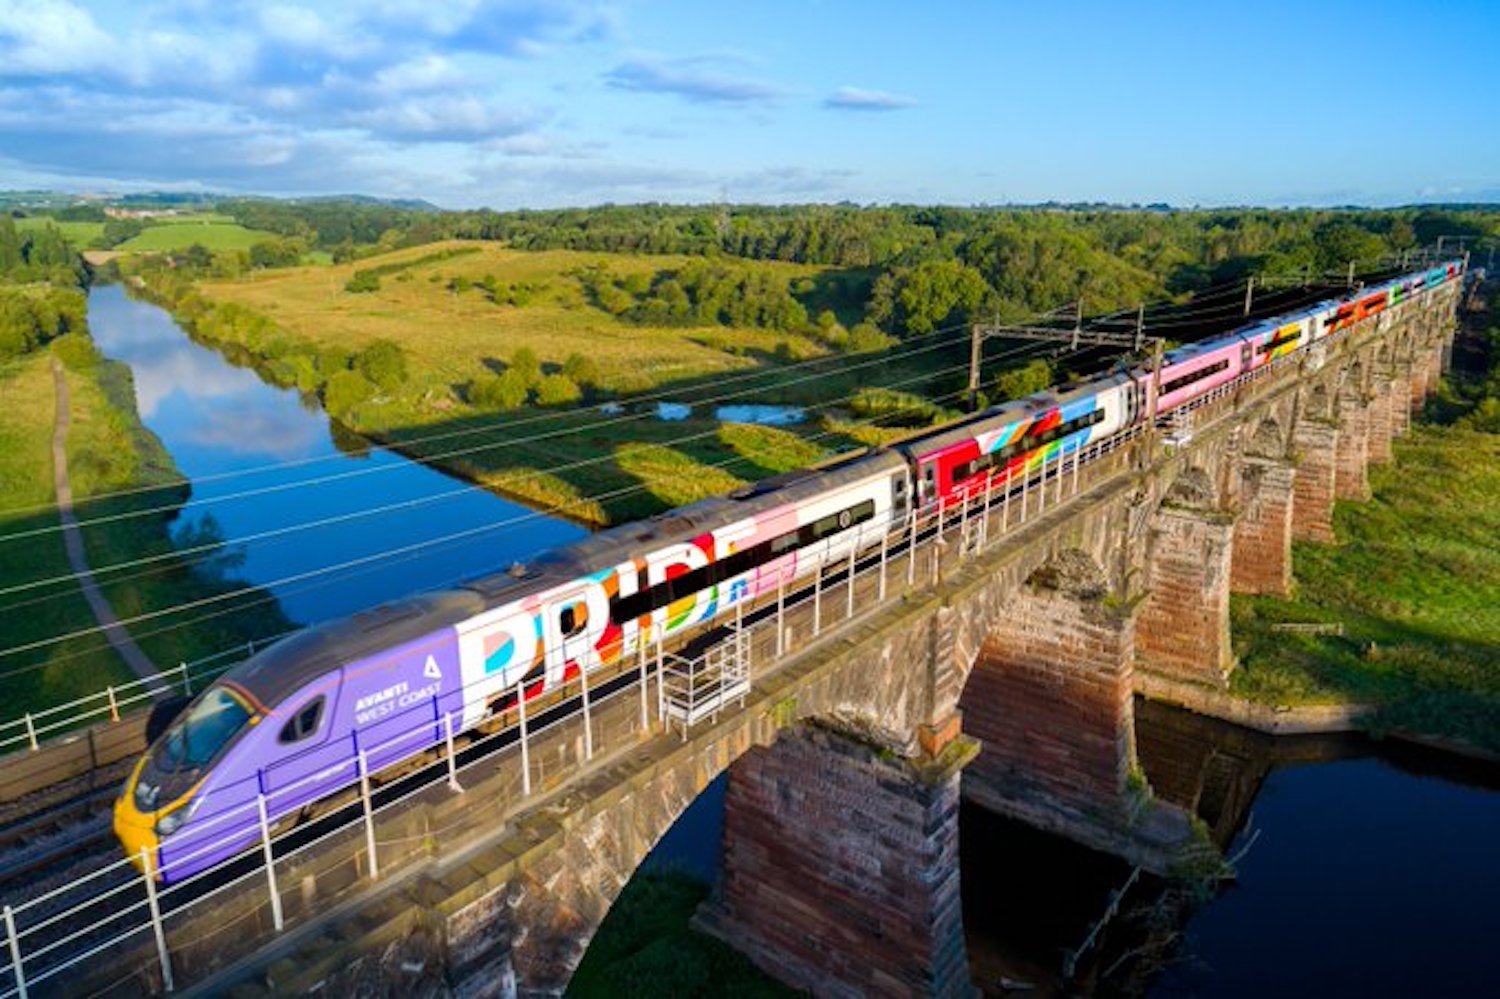 Piers Morgan labels the new ‘Pride train’ as “Virtue Signal Express”